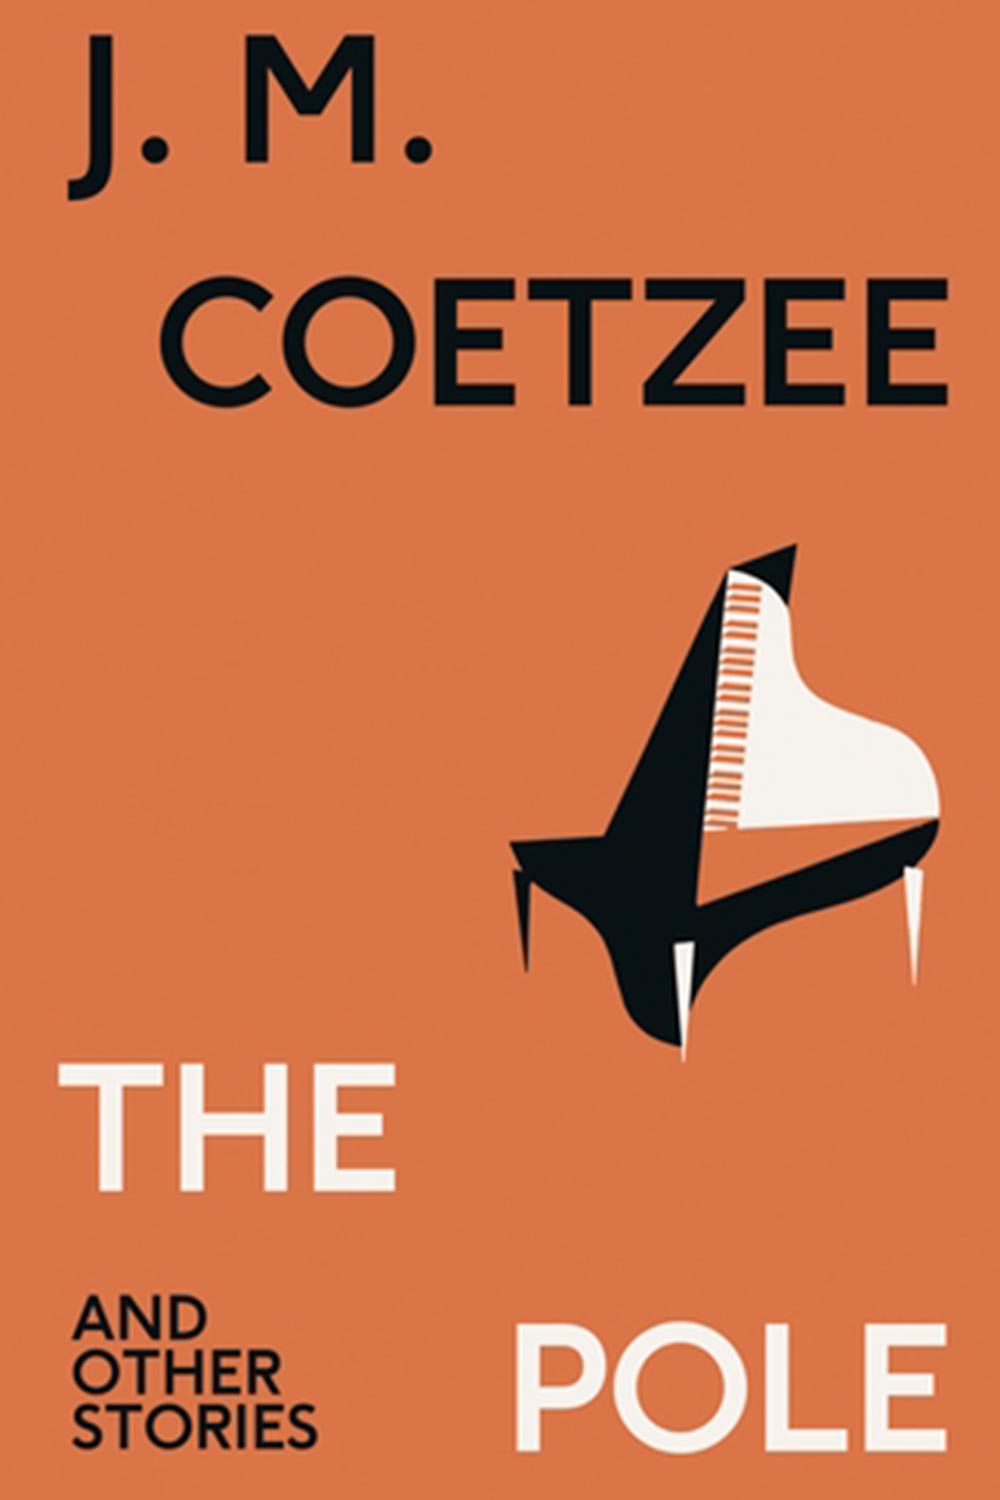  The Pole and Other Stories, JM Coetzee makes the Marie Claire Best books of 2023 list